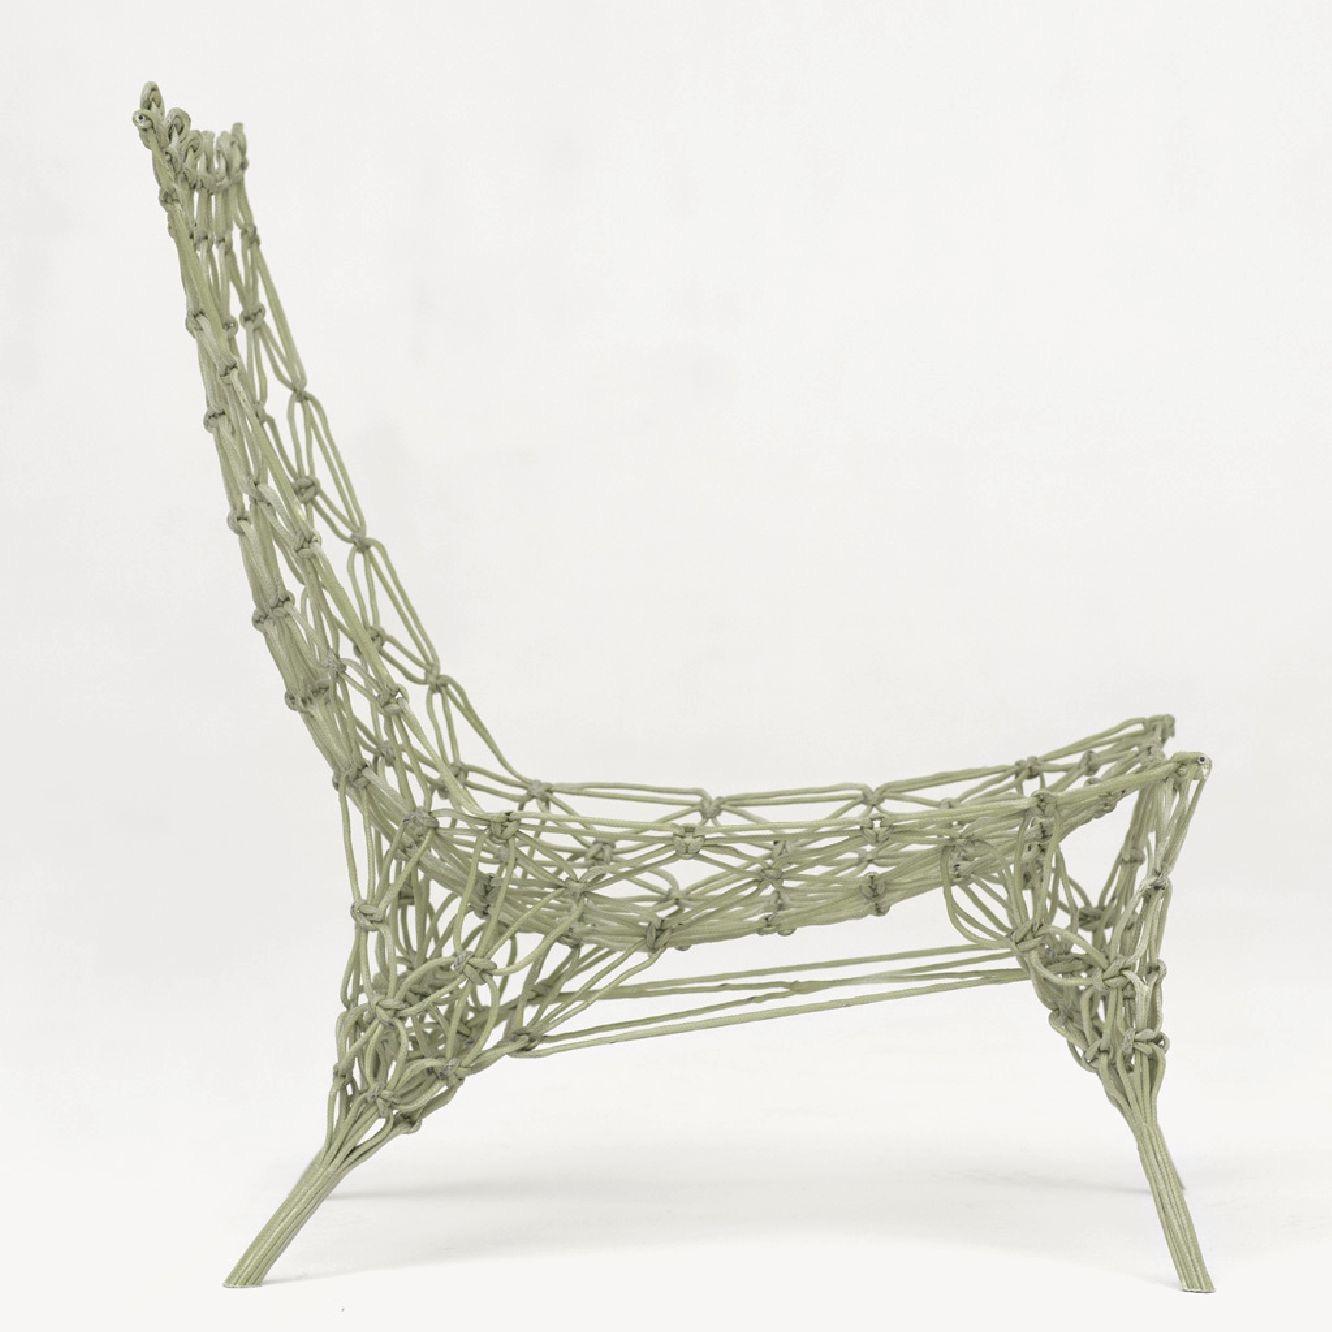 Marcel Wanders, Droog Design, Cappellini knotted chair, 1996, Netherlands, Italy 
The iconic Knotted chair is a brilliant adult interpretation of the tiny chairs used to decorate a doll’s house, a visionary creation by designer Marcel Wanders. This